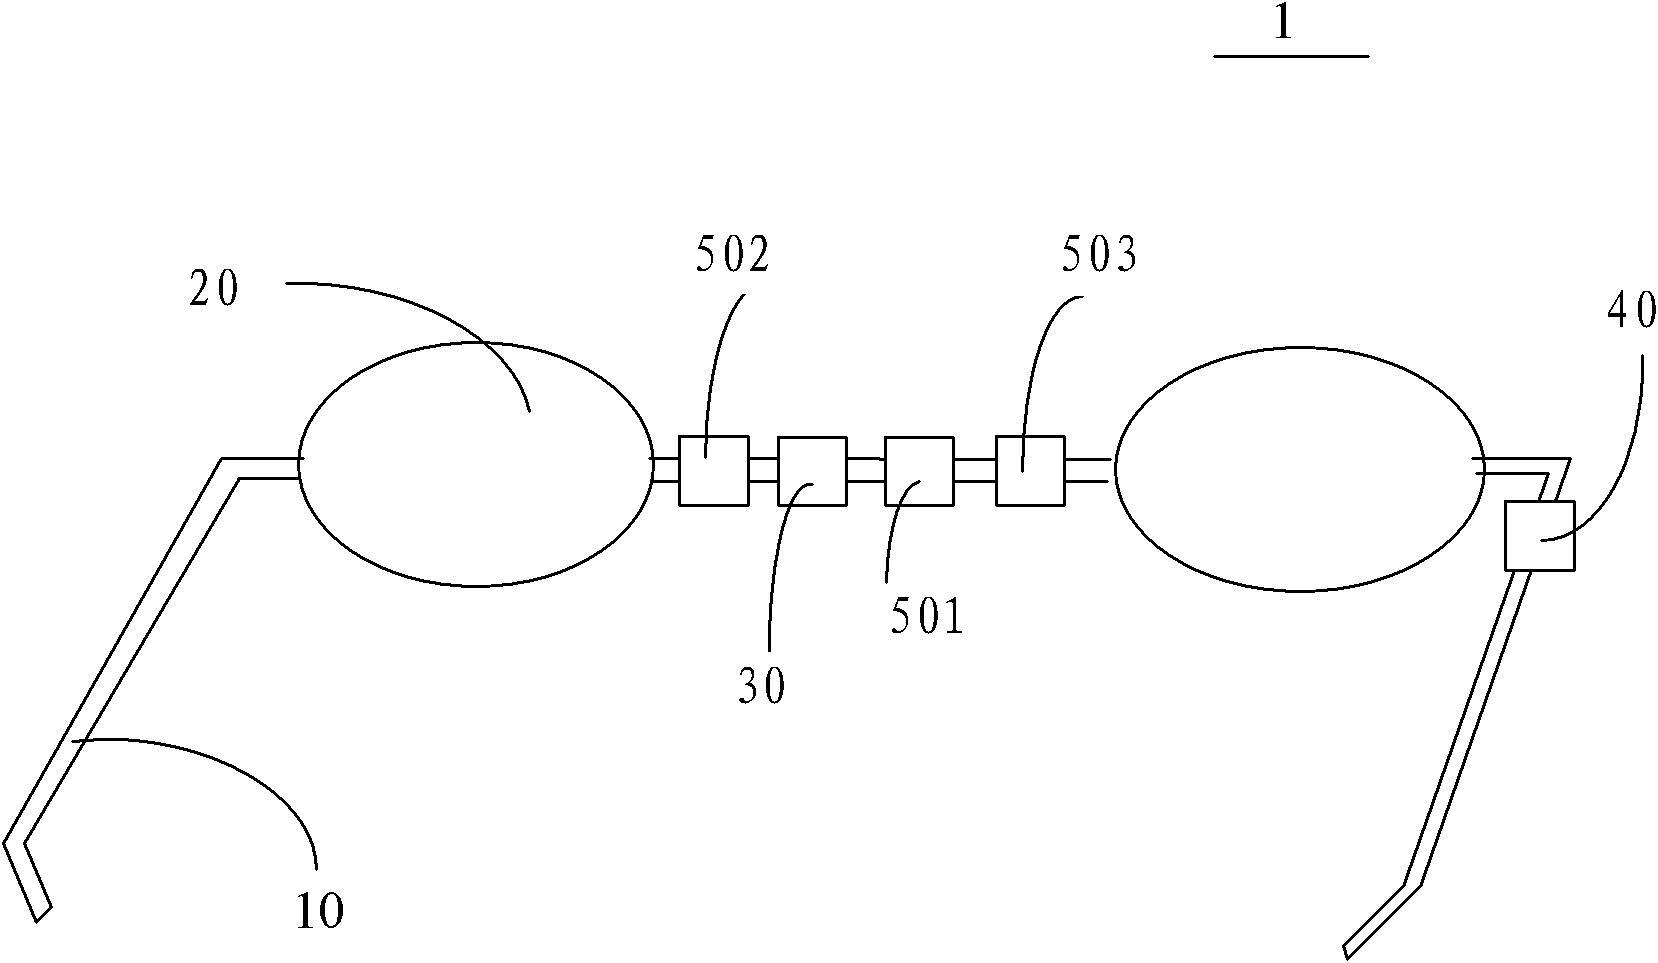 Spectacles-type display device with communication function